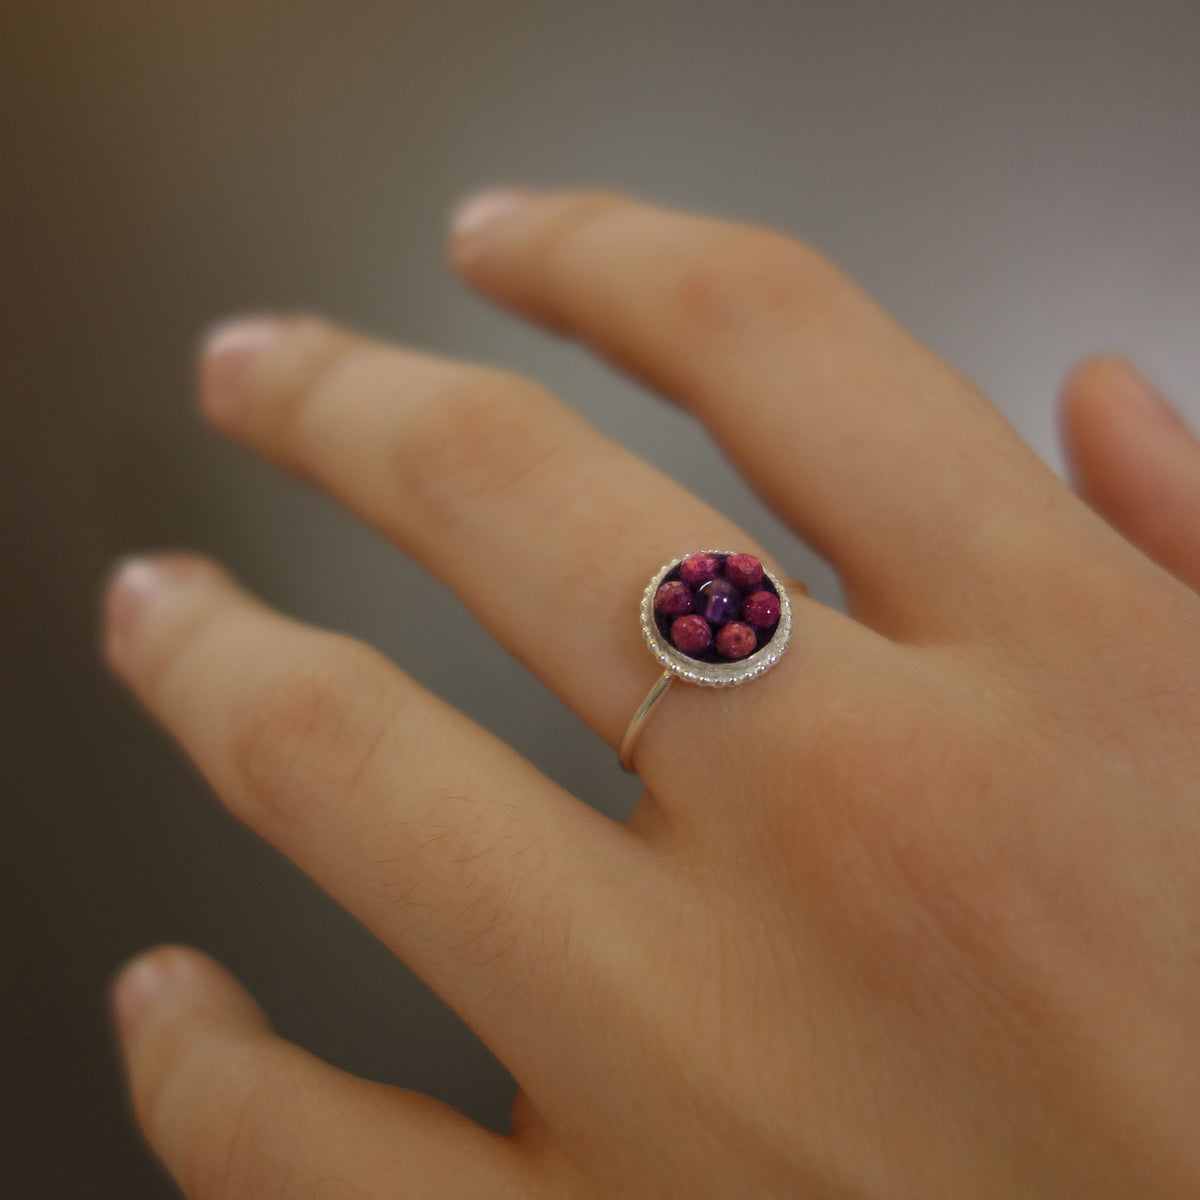 Raspberry Beret ruby and amethyst ring